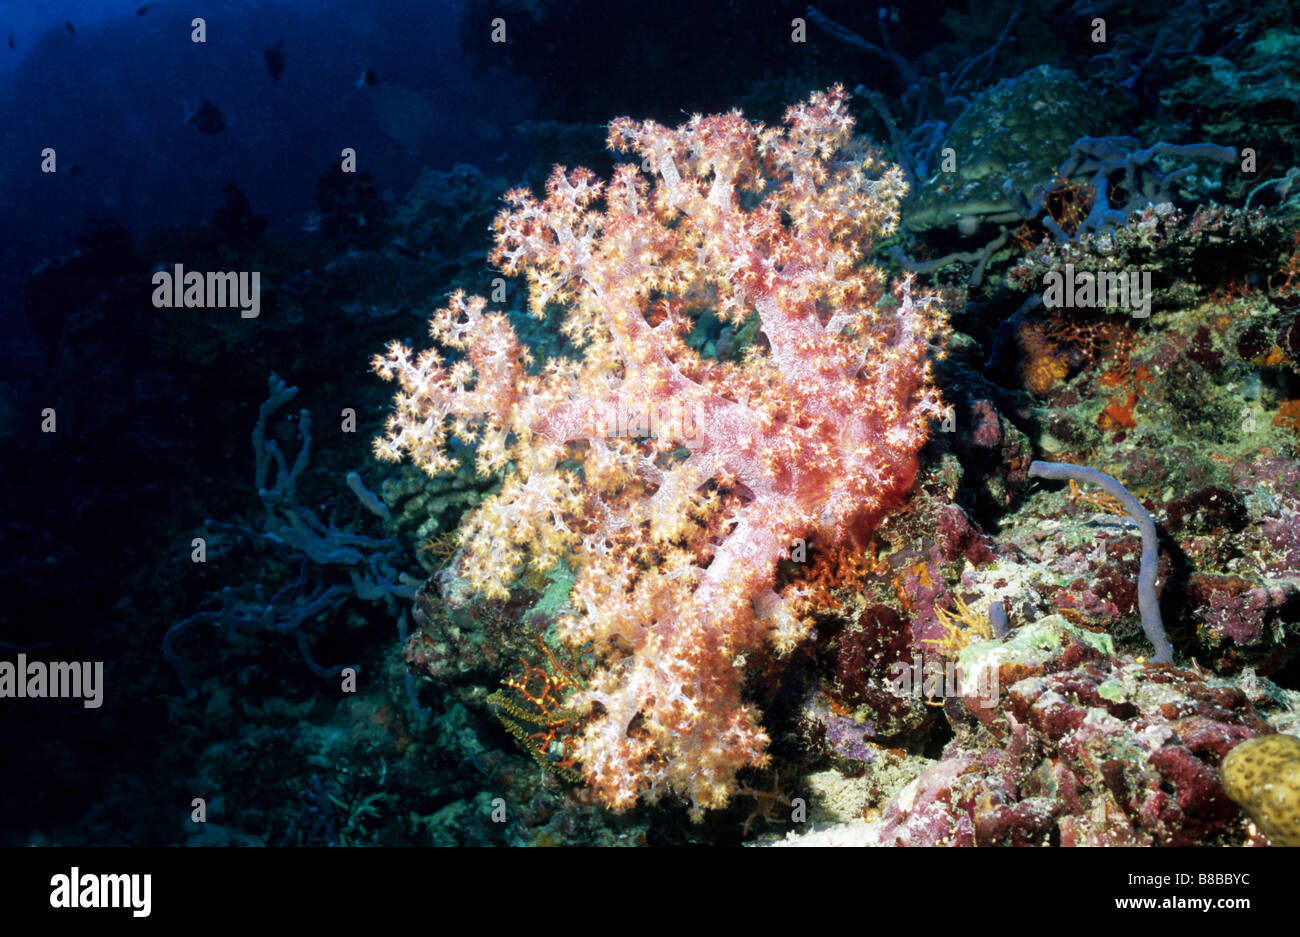 Pink, Spiky, Soft Coral. Alcyonaria. Nephtheidae. Dendronephthya. Underwater marine life of the Maldives. Stock Photo